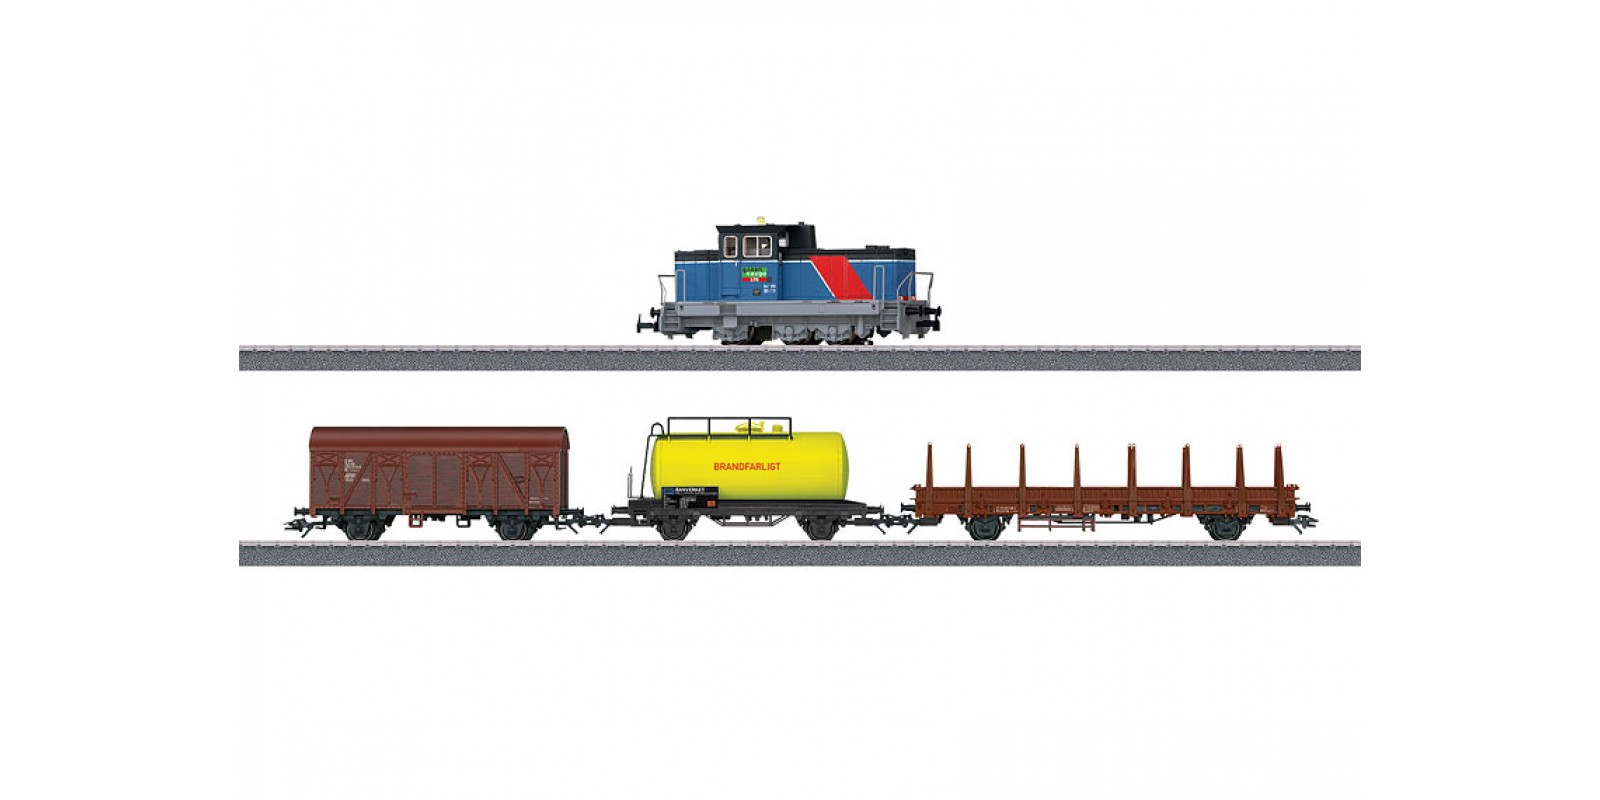 029468_01  Diesel switch engine and Set of 3 cargo wagons from Starter Set "Era VI Swedish Freight Train", w/o packing